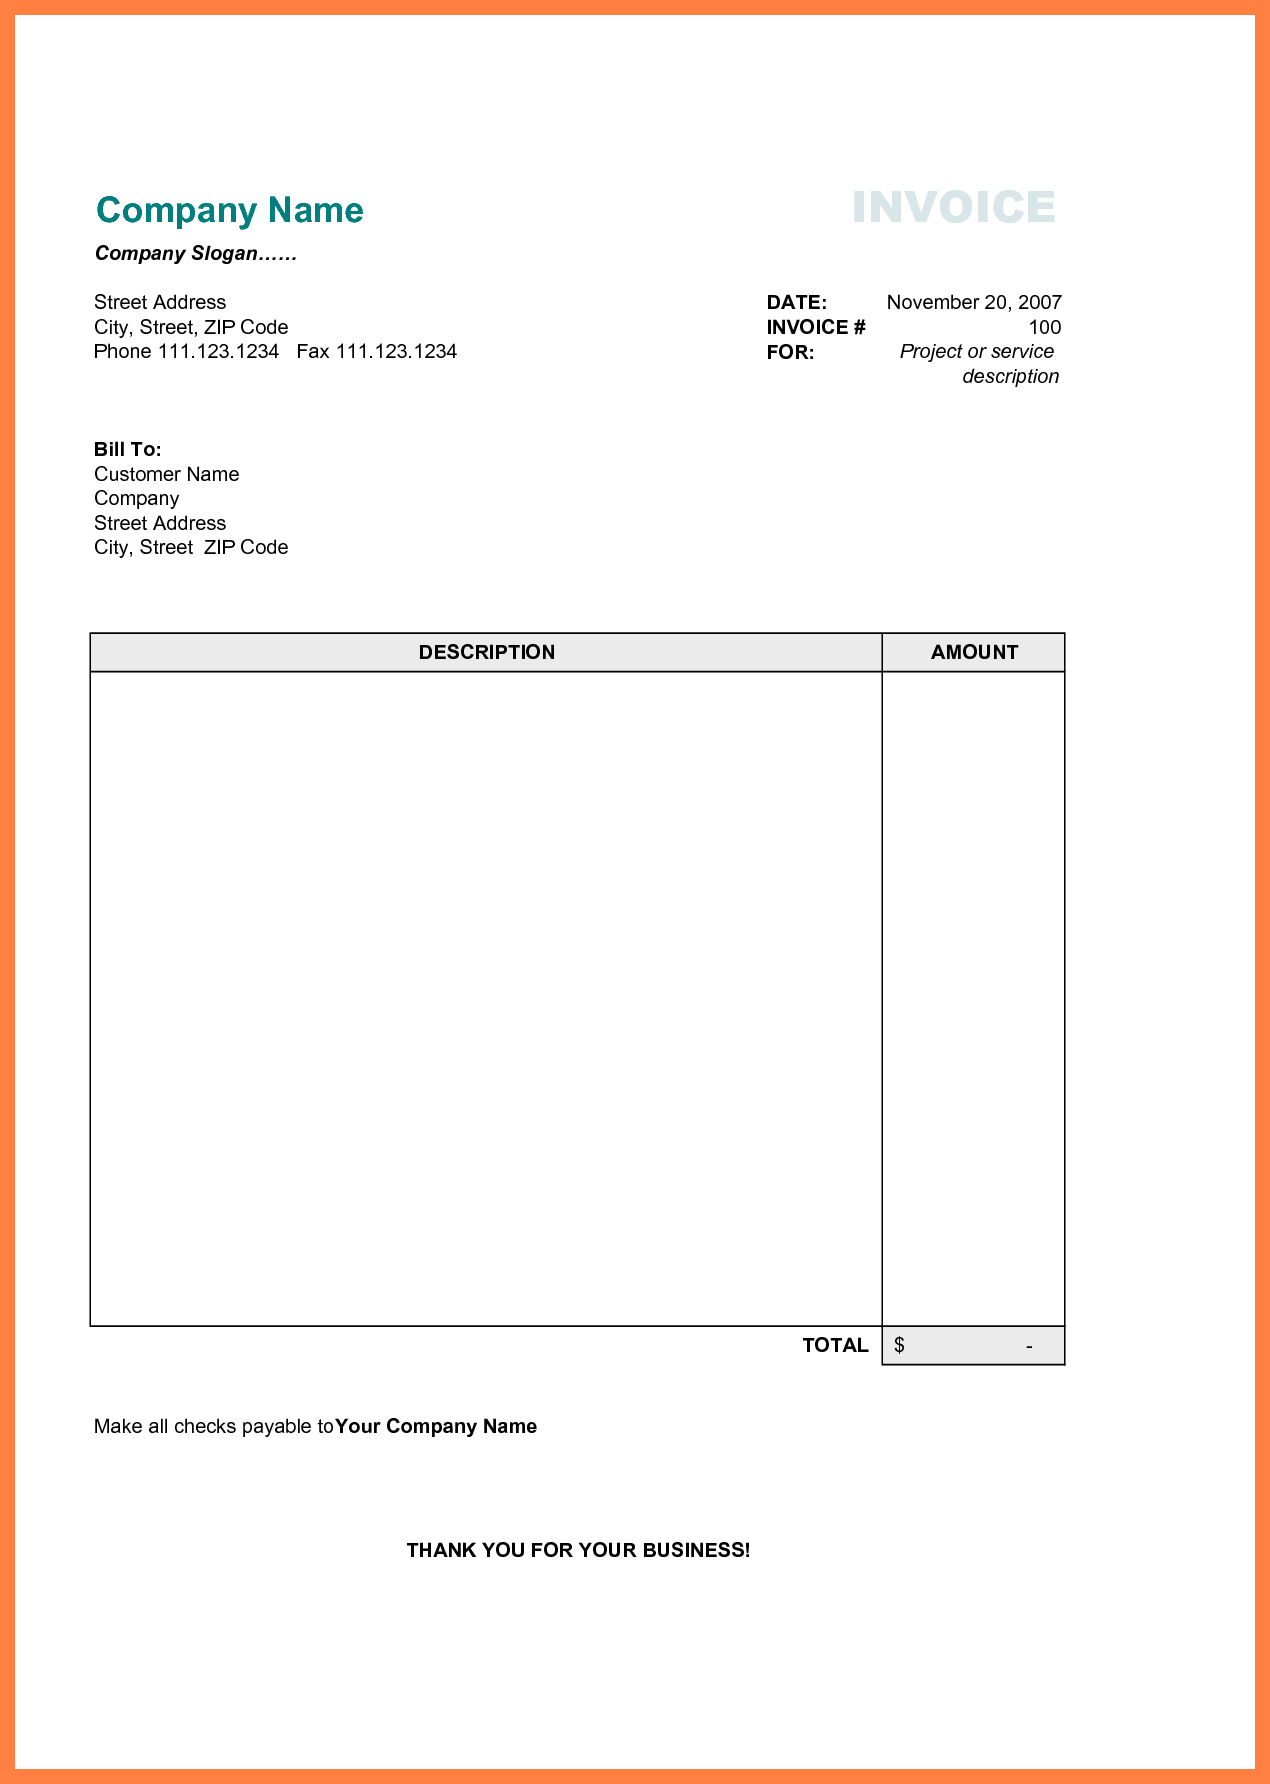 Business Expense Tracking Excel Template Archives - Mavensocial.co - Free Printable Invoice Forms